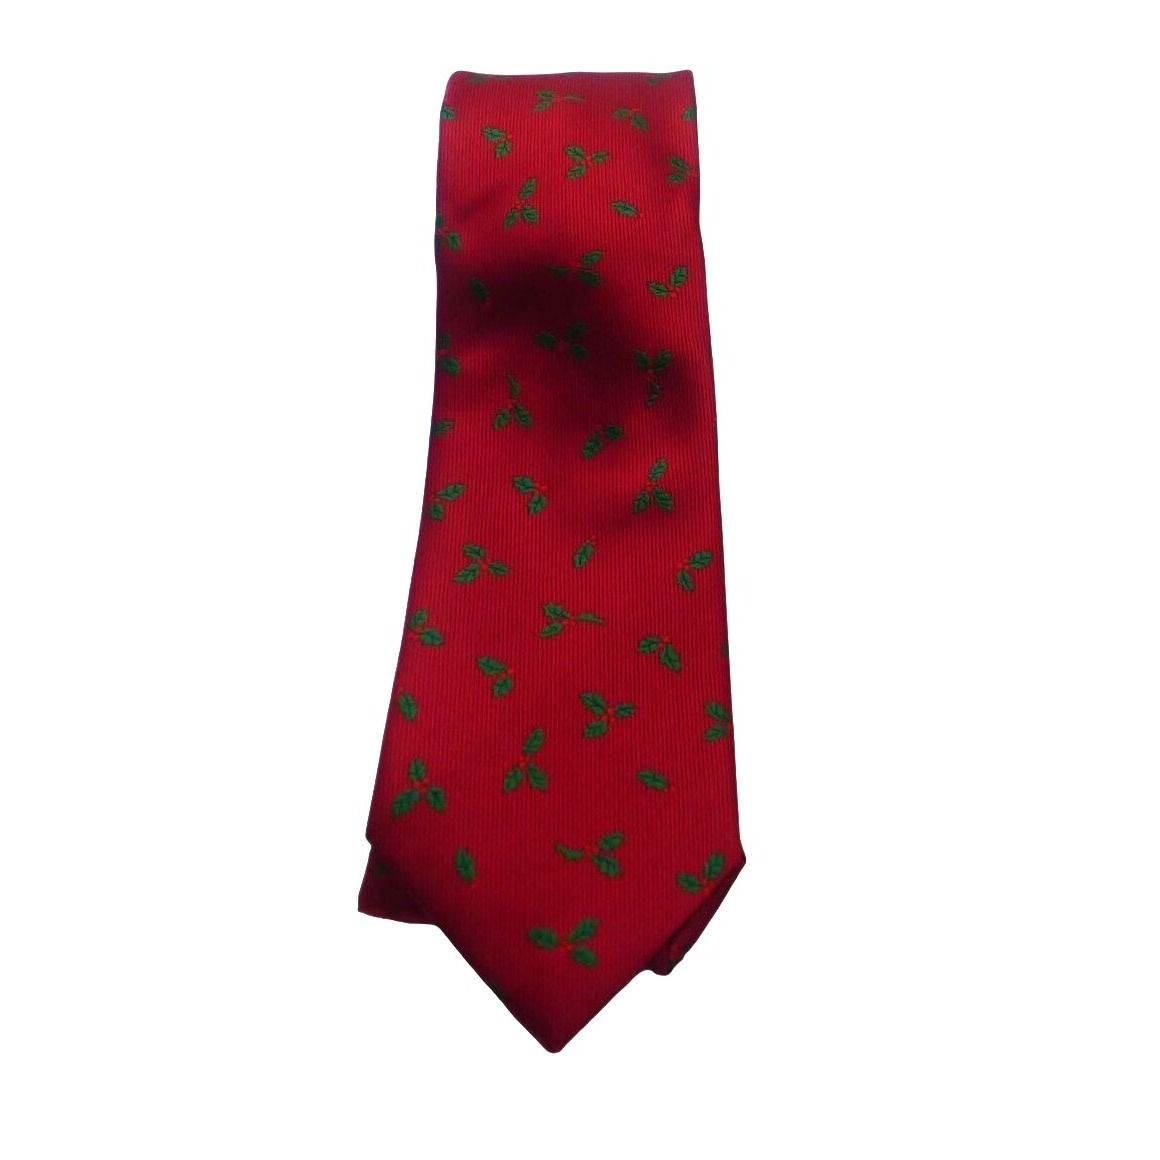 John Ashford JOHN ASHFORD Woven Holly Men's Holiday Tie, Red Size ONE SIZE - 2 Preview